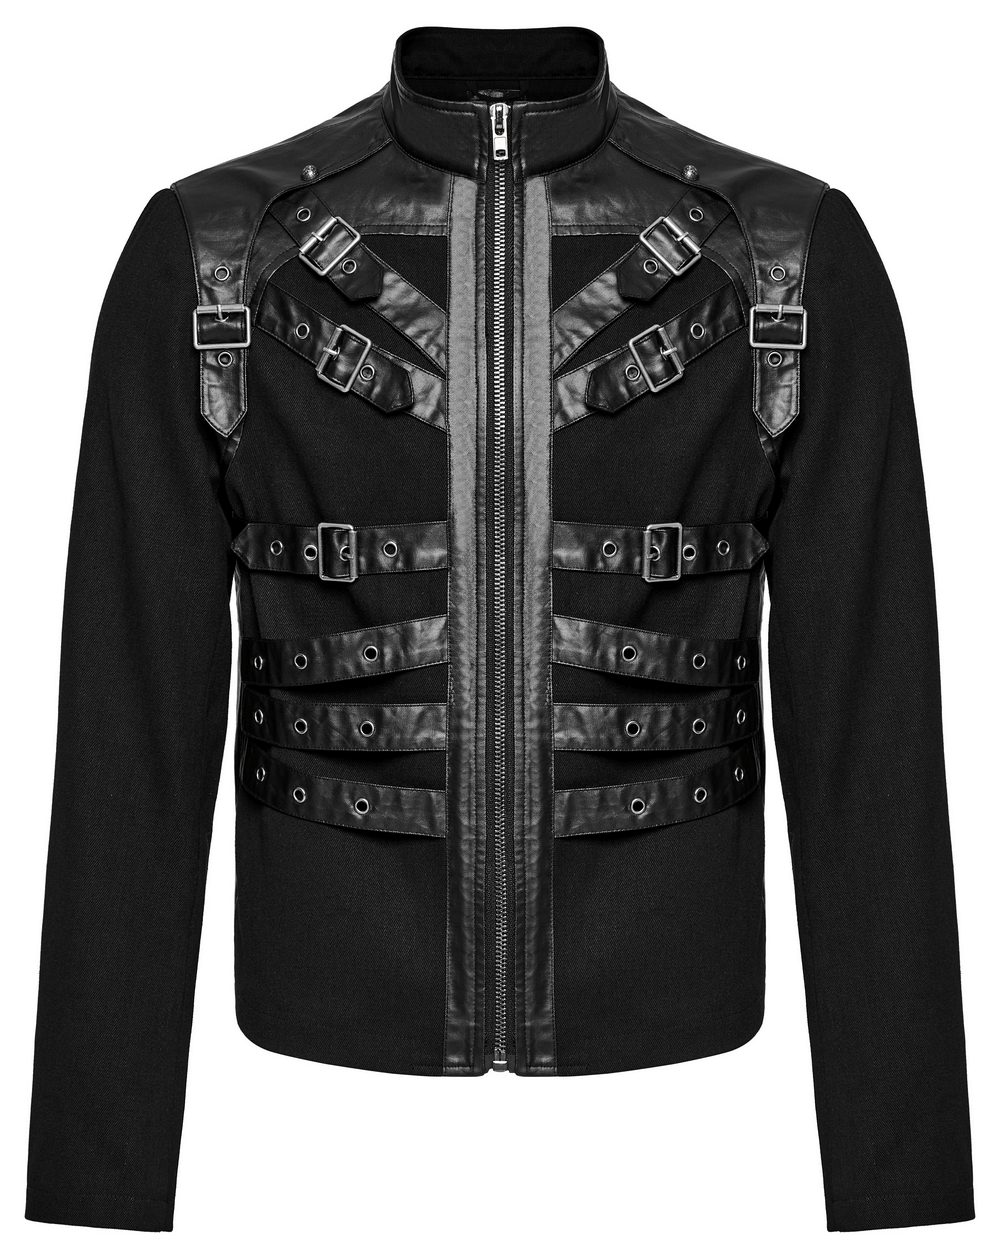 Men's Black Punk Jacket with Buckles and Zipper